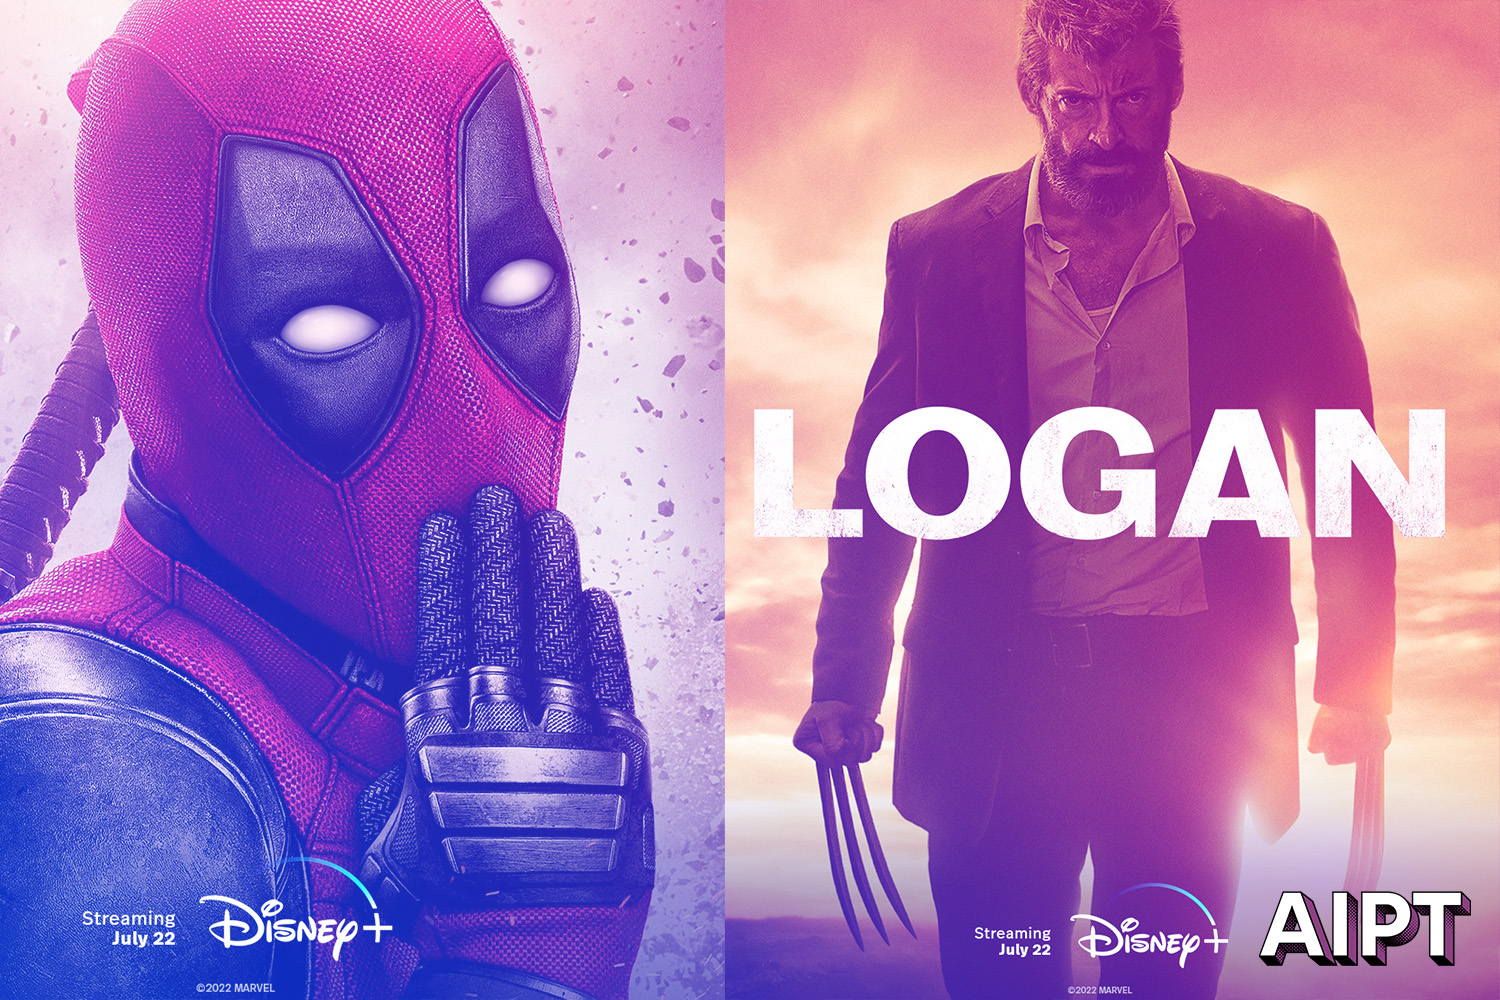 Disney+ fills out its adult-themed Marvel films with 'Deadpool' and 'Logan'